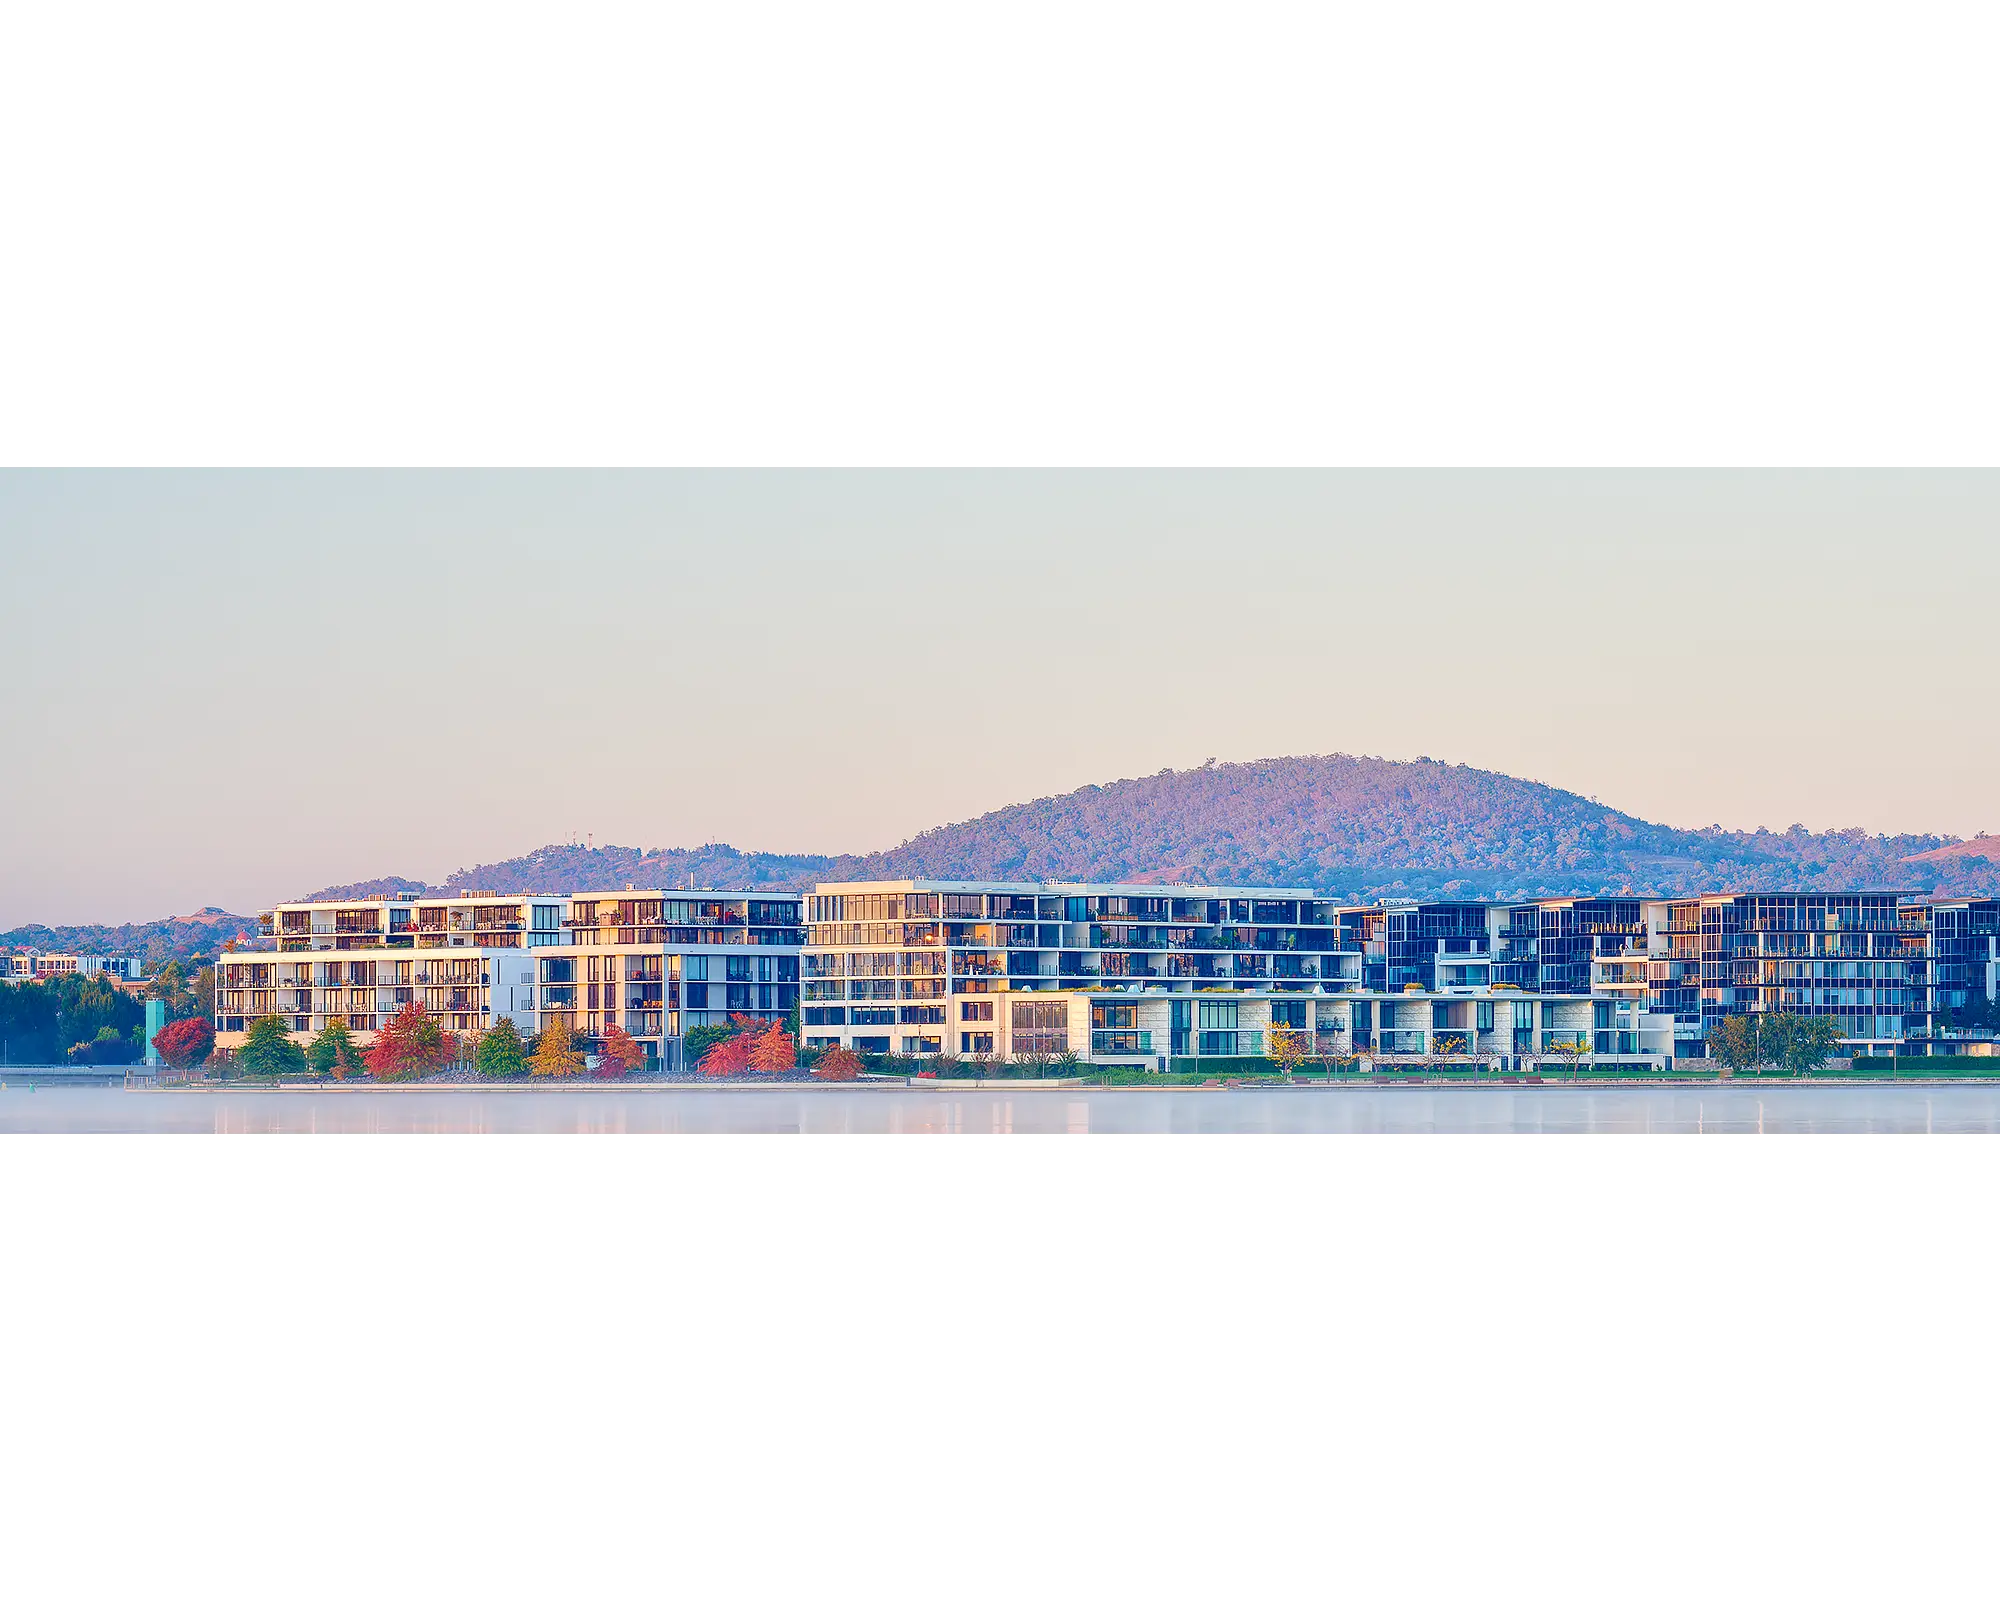 Foreshore Views - Sunrise over the Kingston Foreshore Apartments, Canberra